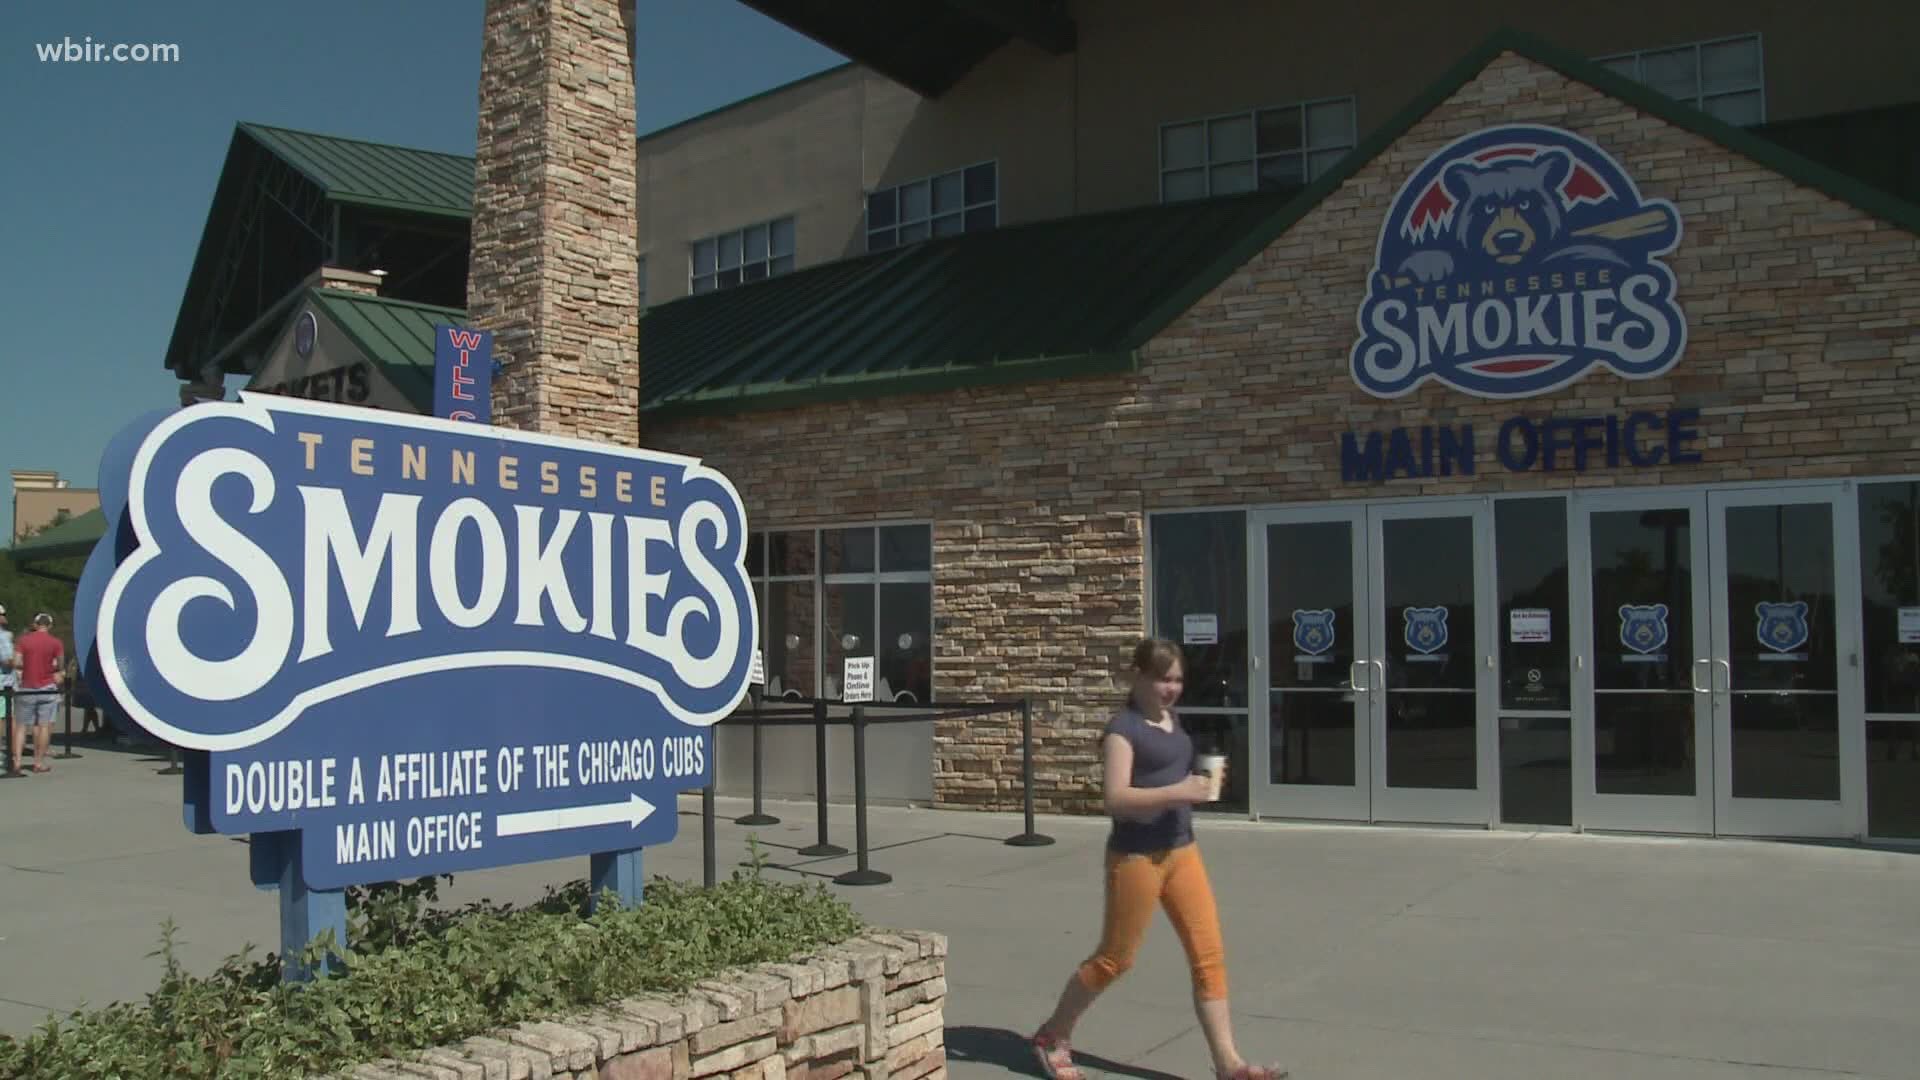 The owner of the Tennessee Smokies baseball team, UT President Randy Boyd, is making his pitch for a potential move from Sevier County to a new stadium in Knoxville.